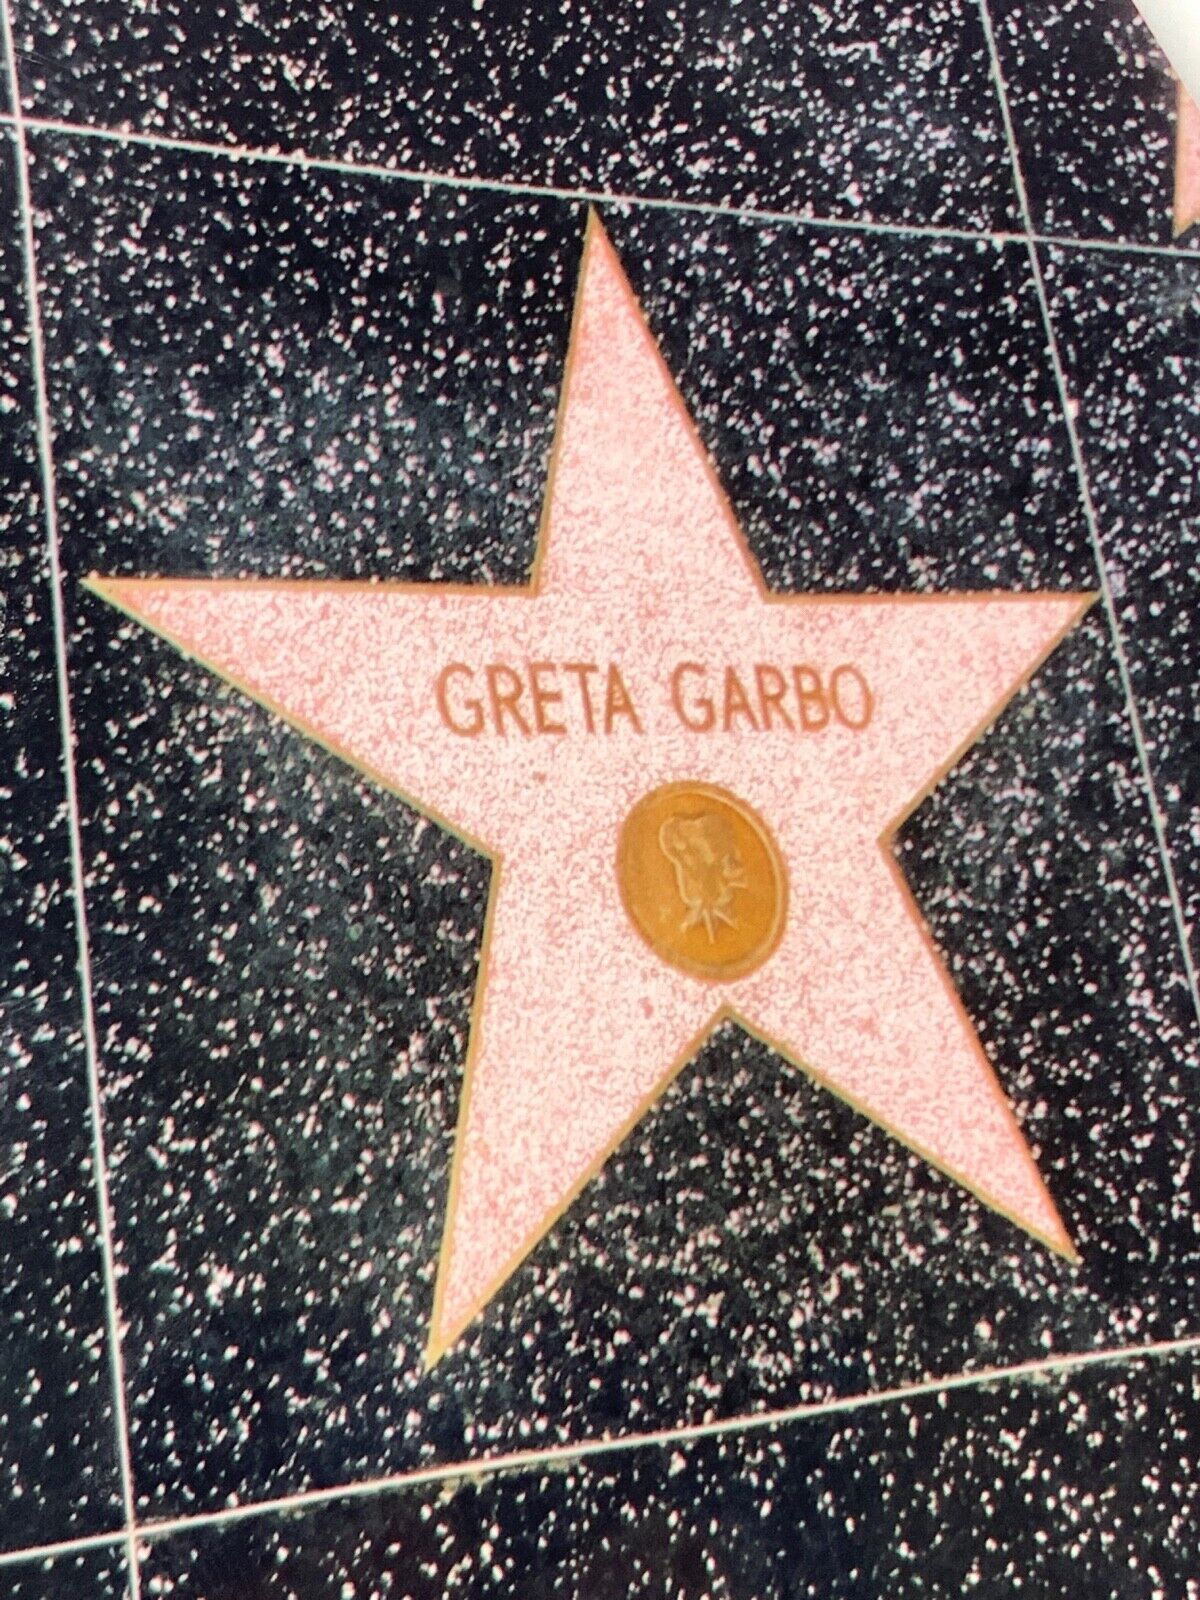 (AtC) FOUND PHOTO Photograph 4x6 Color Gretta Garbo Star Hollywood Walk Of Fame